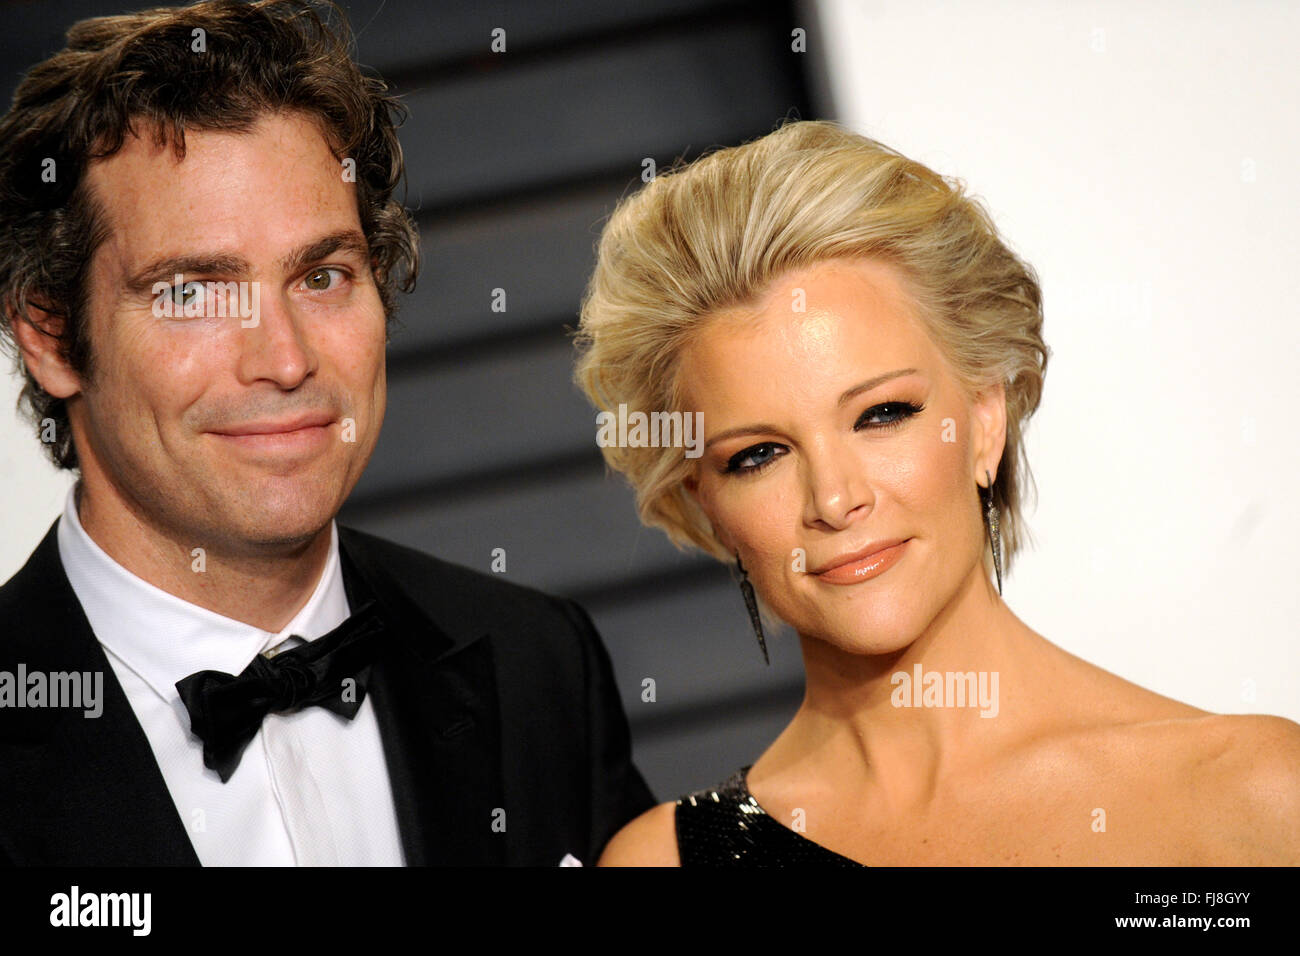 Beverly Hills, California. 28th Feb, 2016. Megyn Kelly and guest attending the 2016 Vanity Fair Oscar Party Hosted By Graydon Carter at Wallis Annenberg Center for the Performing Arts on February 28, 2016 in Beverly Hills, California. © dpa/Alamy Live News Stock Photo